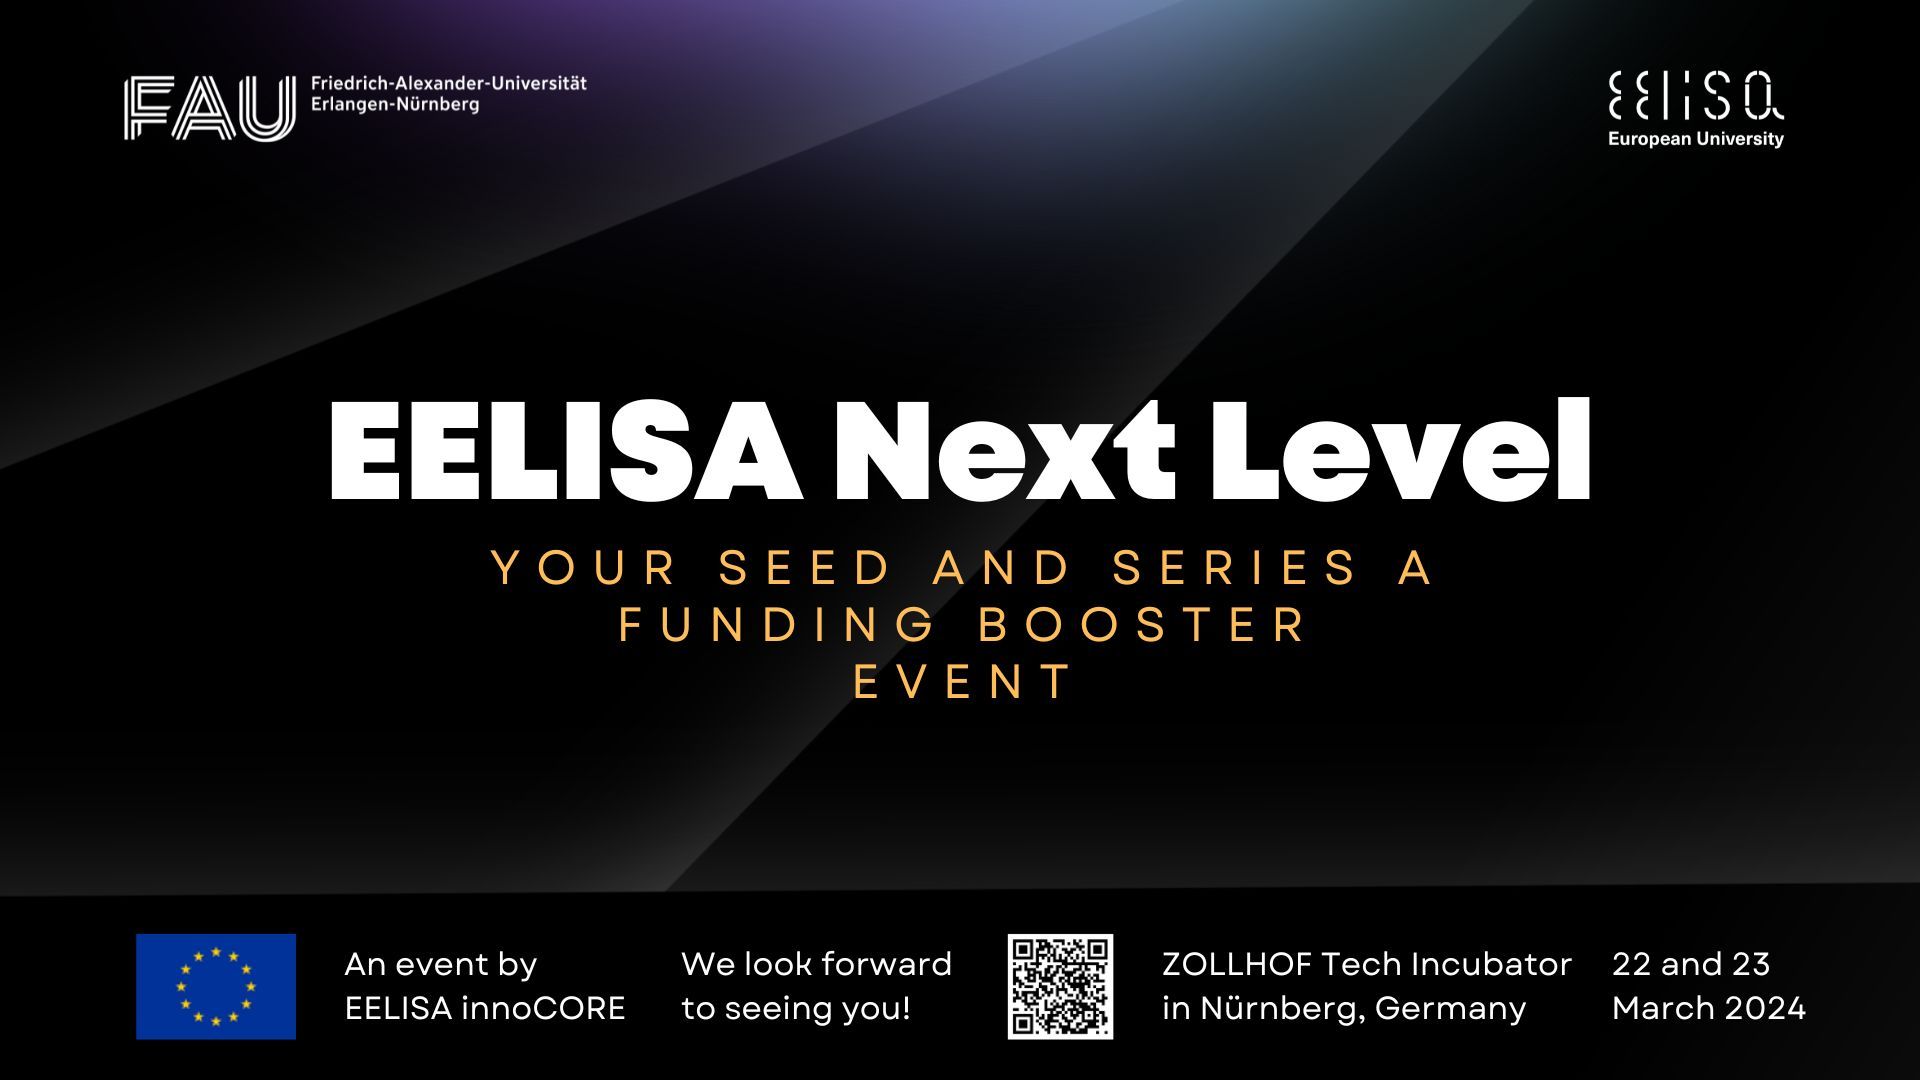 EELISA Next Level: Your Seed and Series A Funding Booster Event - EELISA